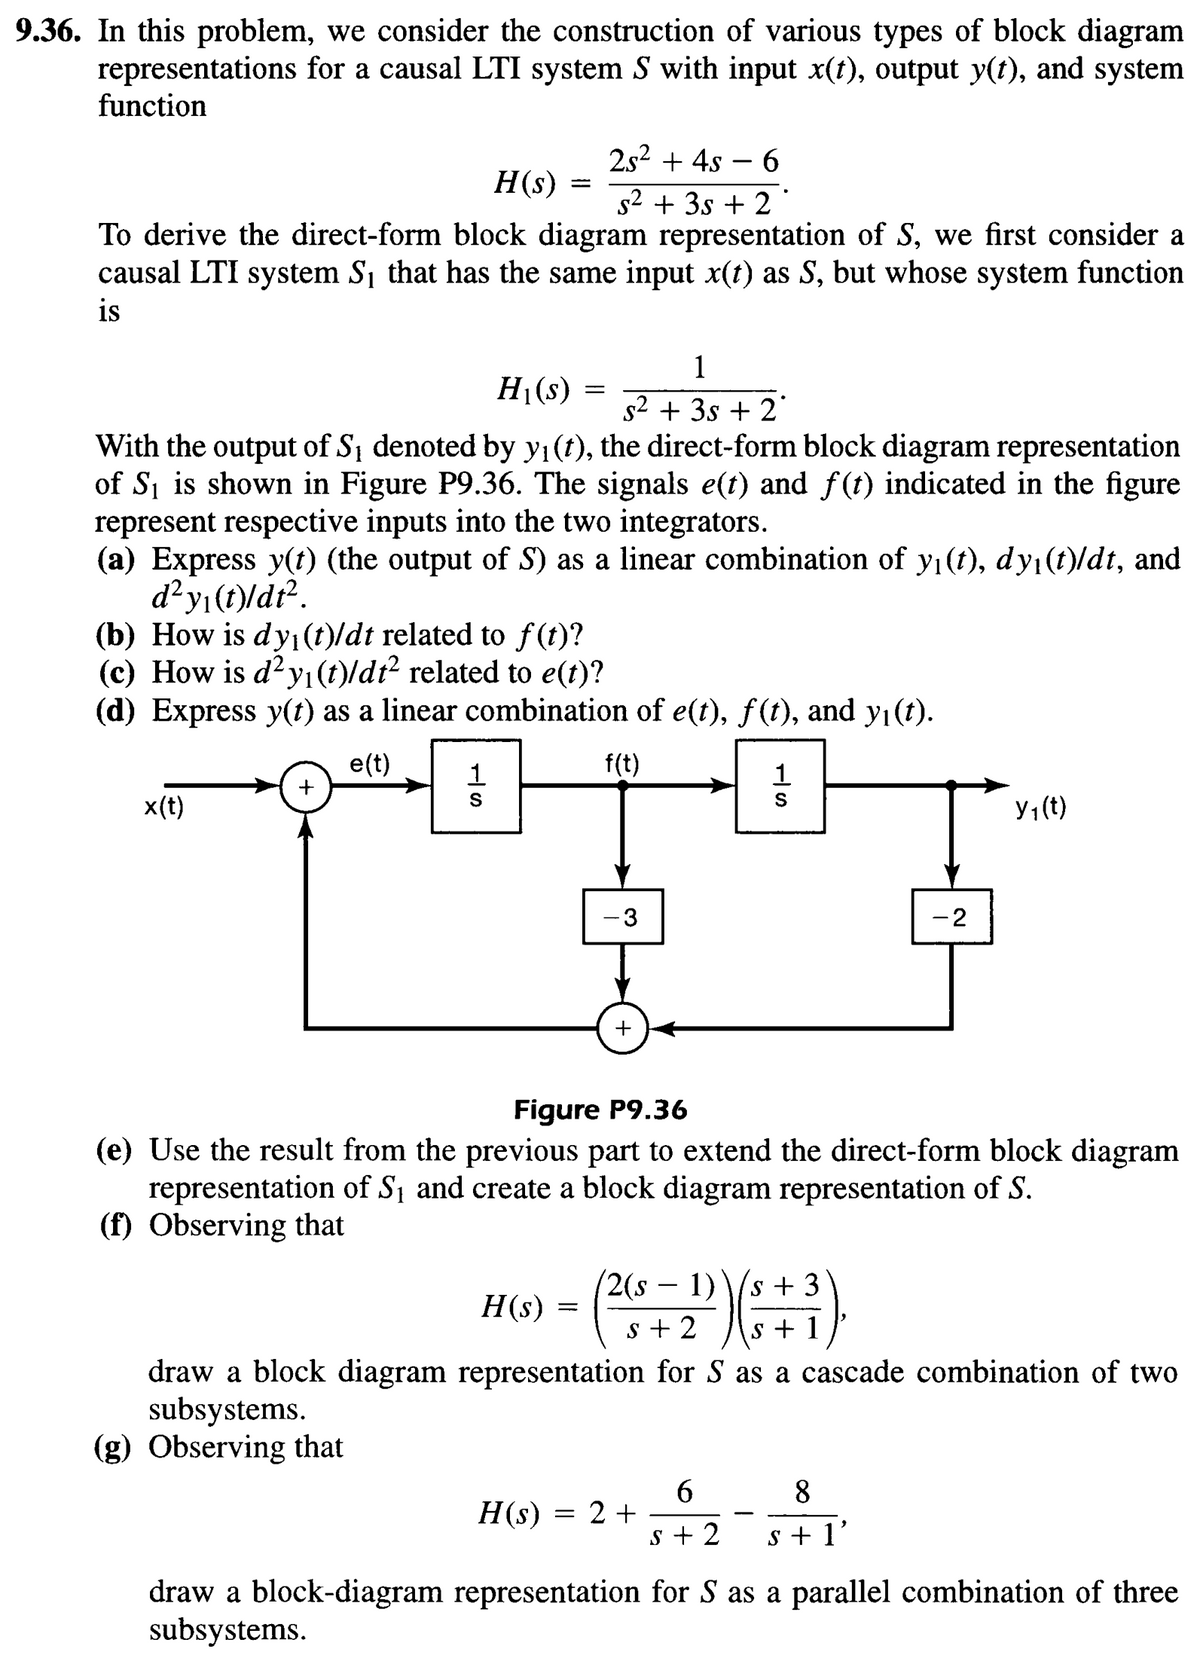 9.36. In this problem, we consider the construction of various types of block diagram
representations for a causal LTI system S with input x(t), output y(t), and system
function
2s²+4s-6
H(s) =
s² + 3s + 2
To derive the direct-form block diagram representation of S, we first consider a
causal LTI system S₁ that has the same input x(t) as S, but whose system function
is
H₁(s)
=
1
s² + 3s + 2*
With the output of S₁ denoted by y₁(t), the direct-form block diagram representation
of S₁ is shown in Figure P9.36. The signals e(t) and f(t) indicated in the figure
represent respective inputs into the two integrators.
(a) Express y(t) (the output of S) as a linear combination of y₁(t), dy₁(t)/dt, and
d² y₁(t)/dt².
(b) How is dy₁(t)/dt related to f(t)?
(c) How is d²y₁(t)/dt² related to e(t)?
(d) Express y(t) as a linear combination of e(t), ƒ(t), and y₁(t).
e(t)
+
-S
1
x(t)
f(t)
- 3
+
1
-S
-2
y₁(t)
Figure P9.36
(e) Use the result from the previous part to extend the direct-form block diagram
representation of S₁ and create a block diagram representation of S.
(f) Observing that
2(s – 1)
-
H(s)
====
S+3
5+2 s + 1
draw a block diagram representation for S as a cascade combination of two
subsystems.
(g) Observing that
6
8
H(s) = 2+
S+2
s + 1'
draw a block-diagram representation for S as a parallel combination of three
subsystems.